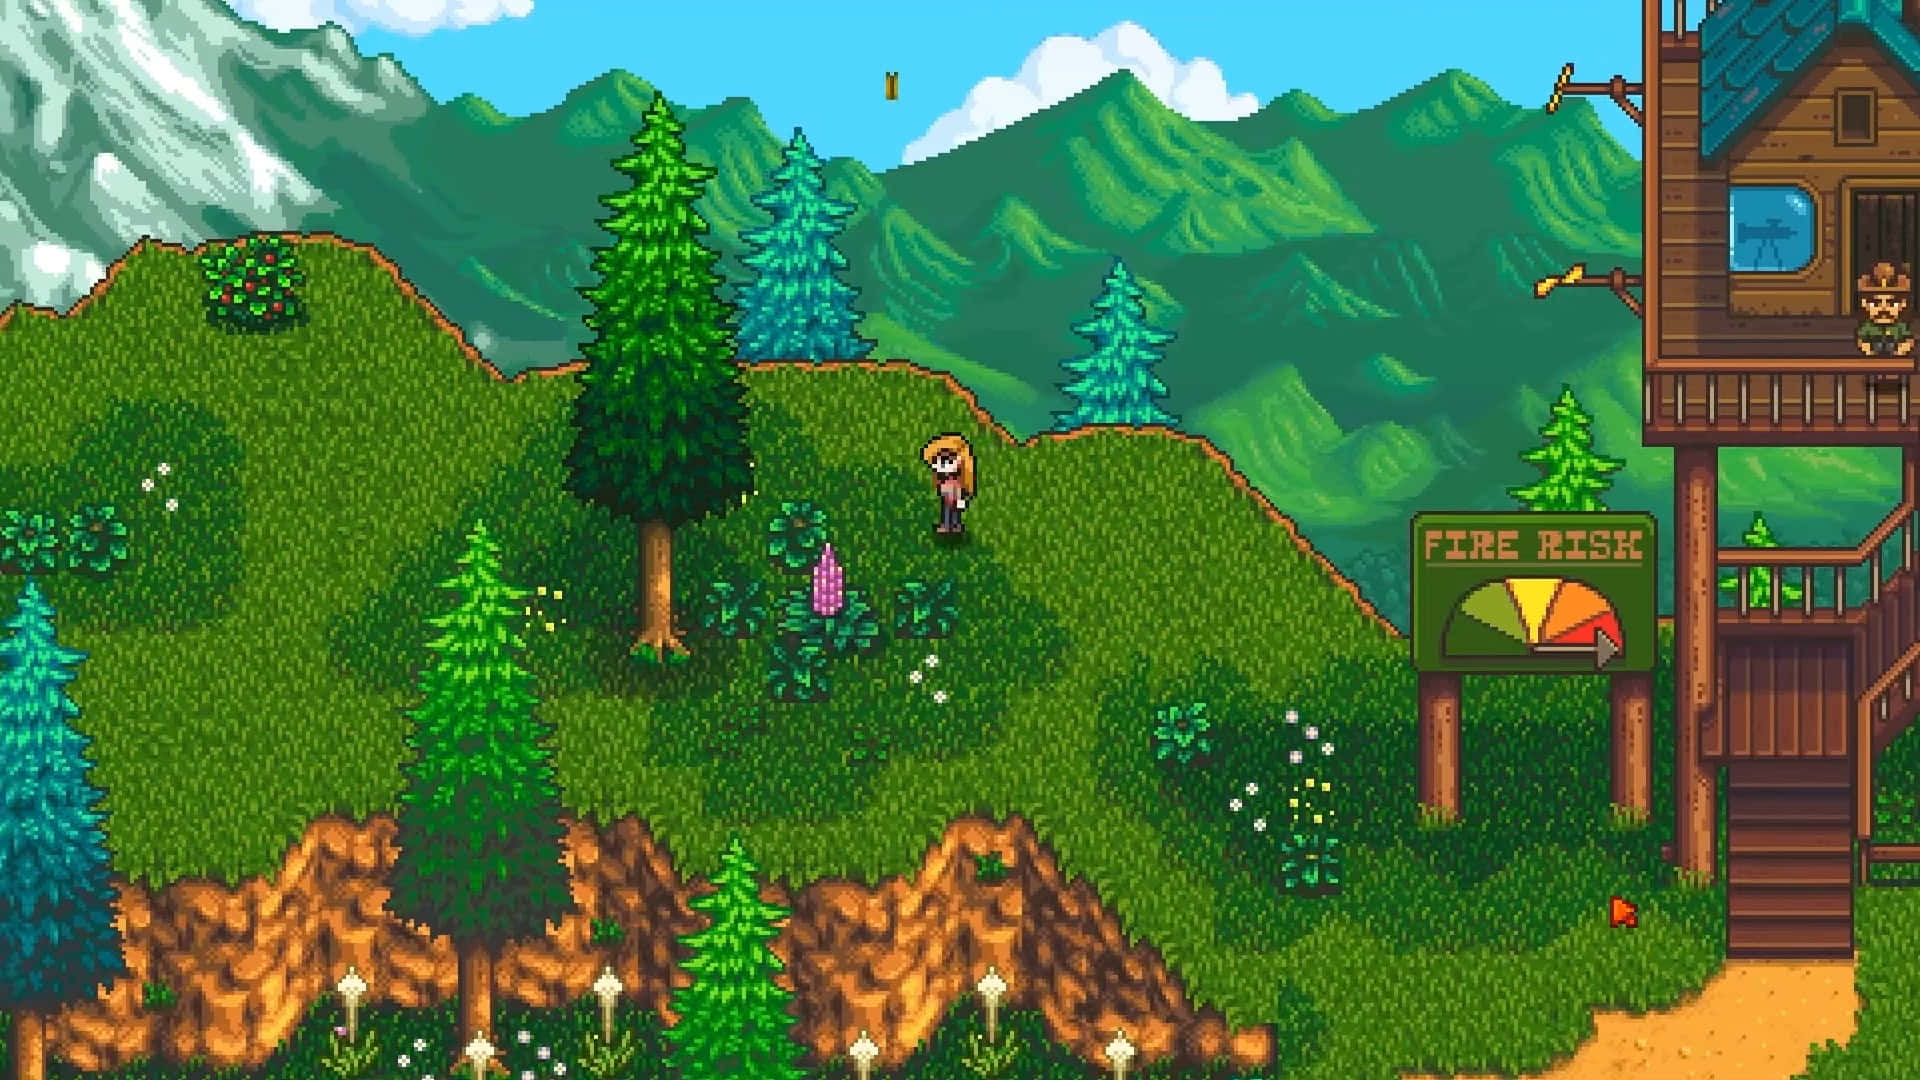 Spend your days in the beautiful, pastoral landscapes of Stardew Valley